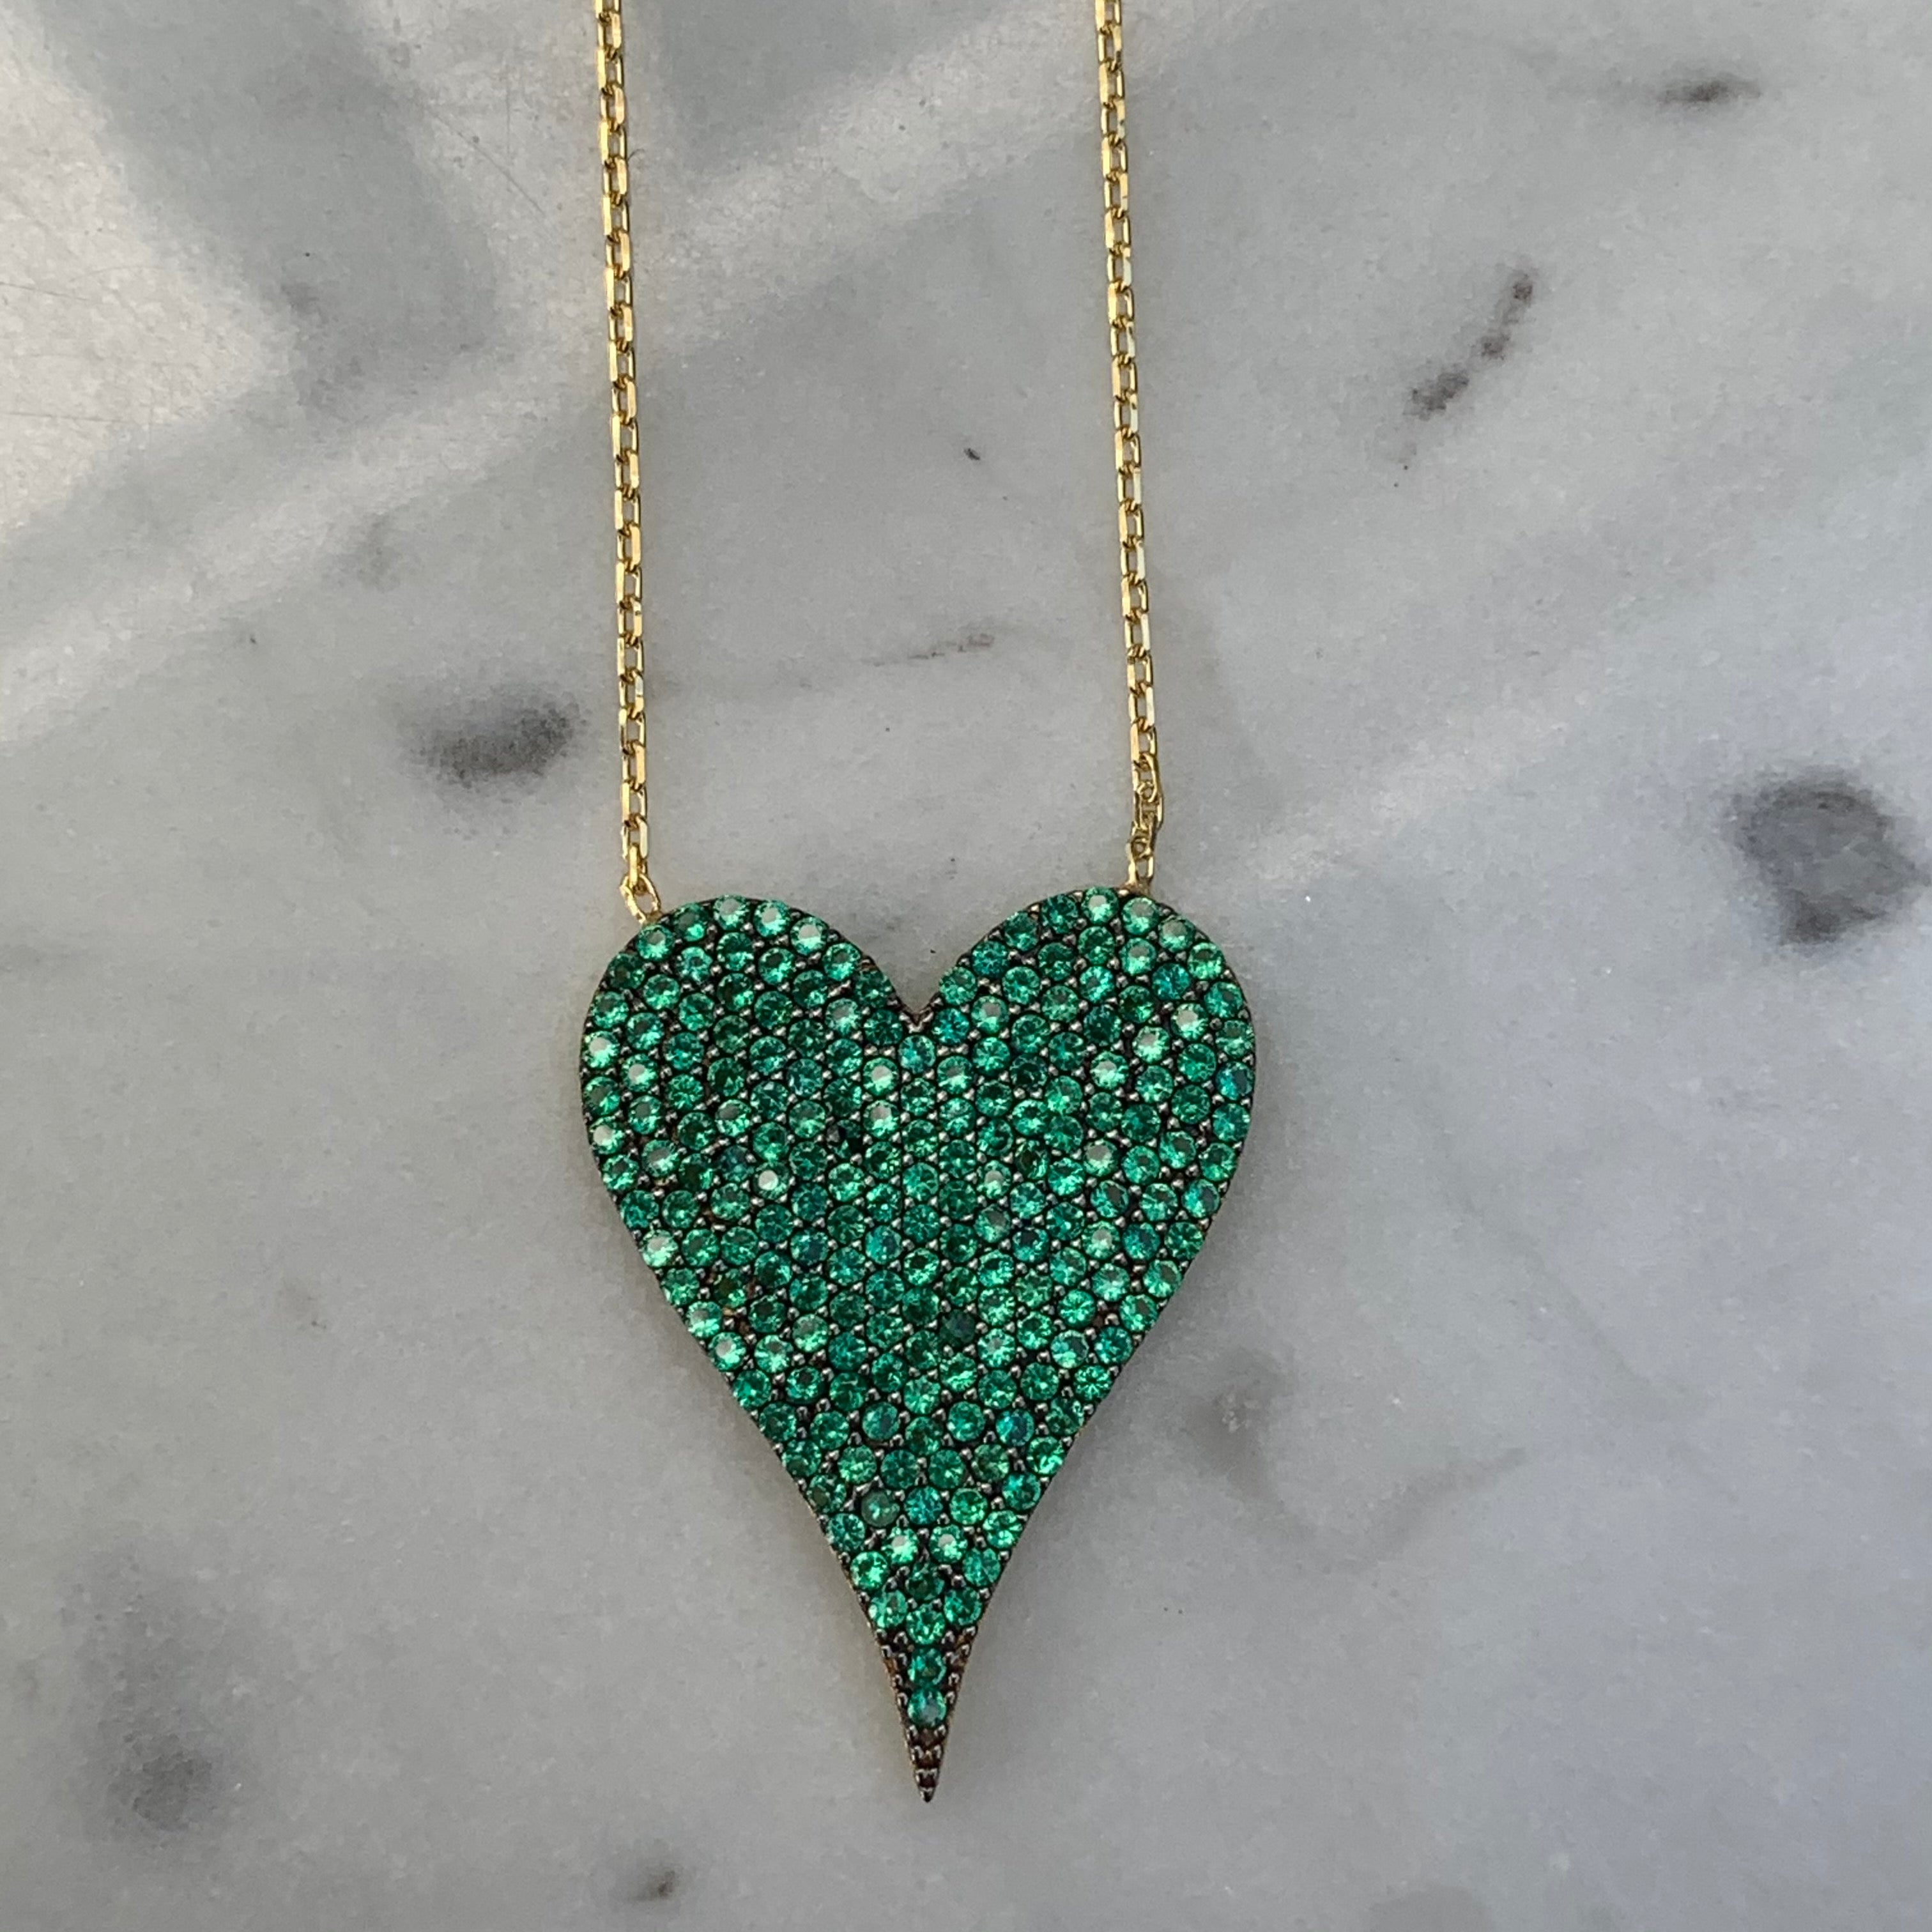 Silver gold plated green “Amore” heart necklace